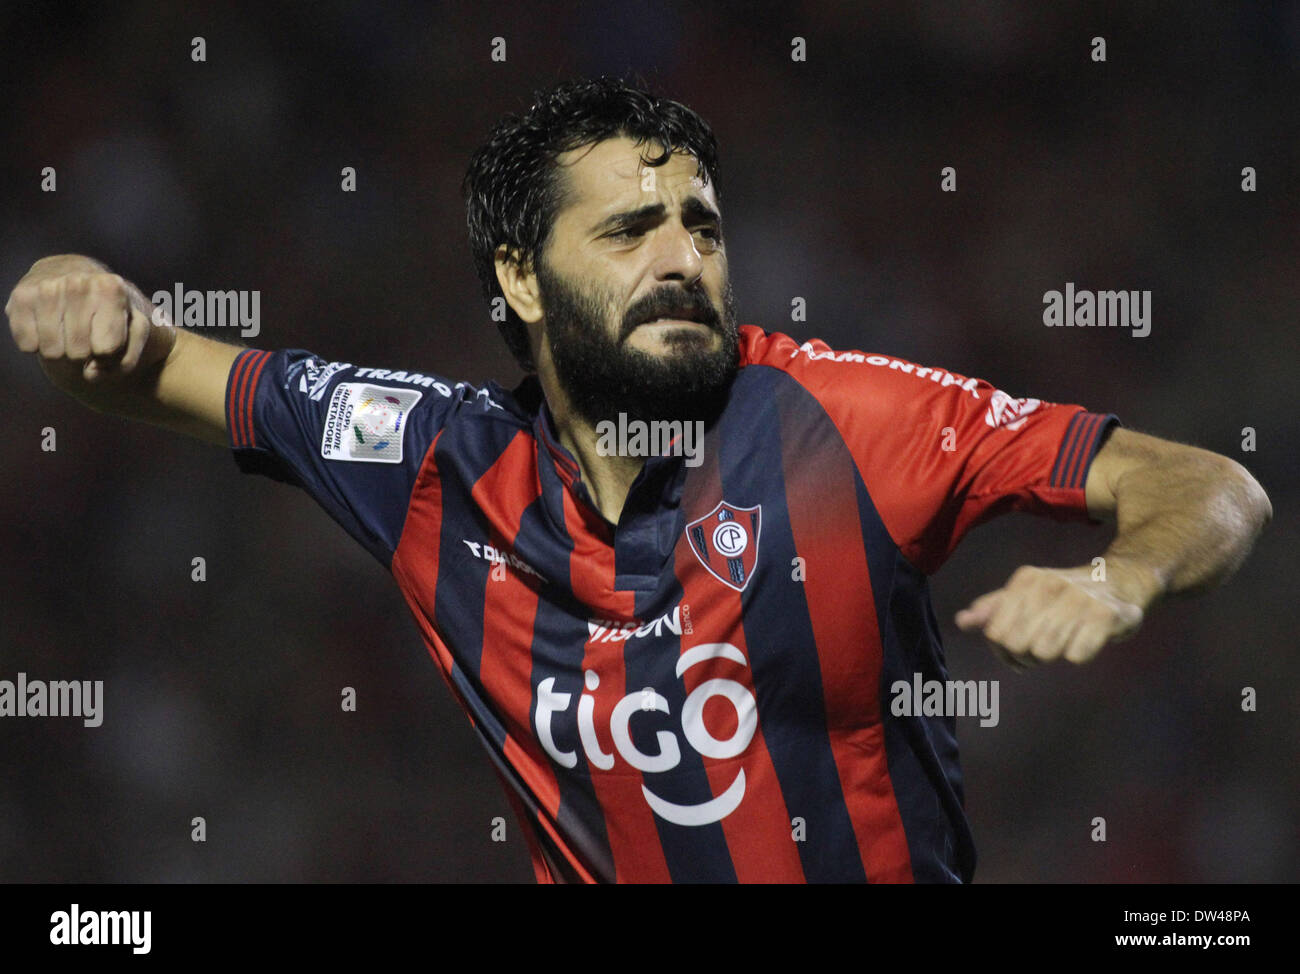 Asuncion, Paraguay. 26th Feb, 2014. Daniel Guiza of Cerro Porteno celebrates his goal during the day 2 match of group 3 of Libertadores Cup against Lanus in the Defensores del Chavo stadium, in Asucion, Paraguay, on Feb. 26, 2014. Credit:  Marcelo Espinosa/Xinhua/Alamy Live News Stock Photo